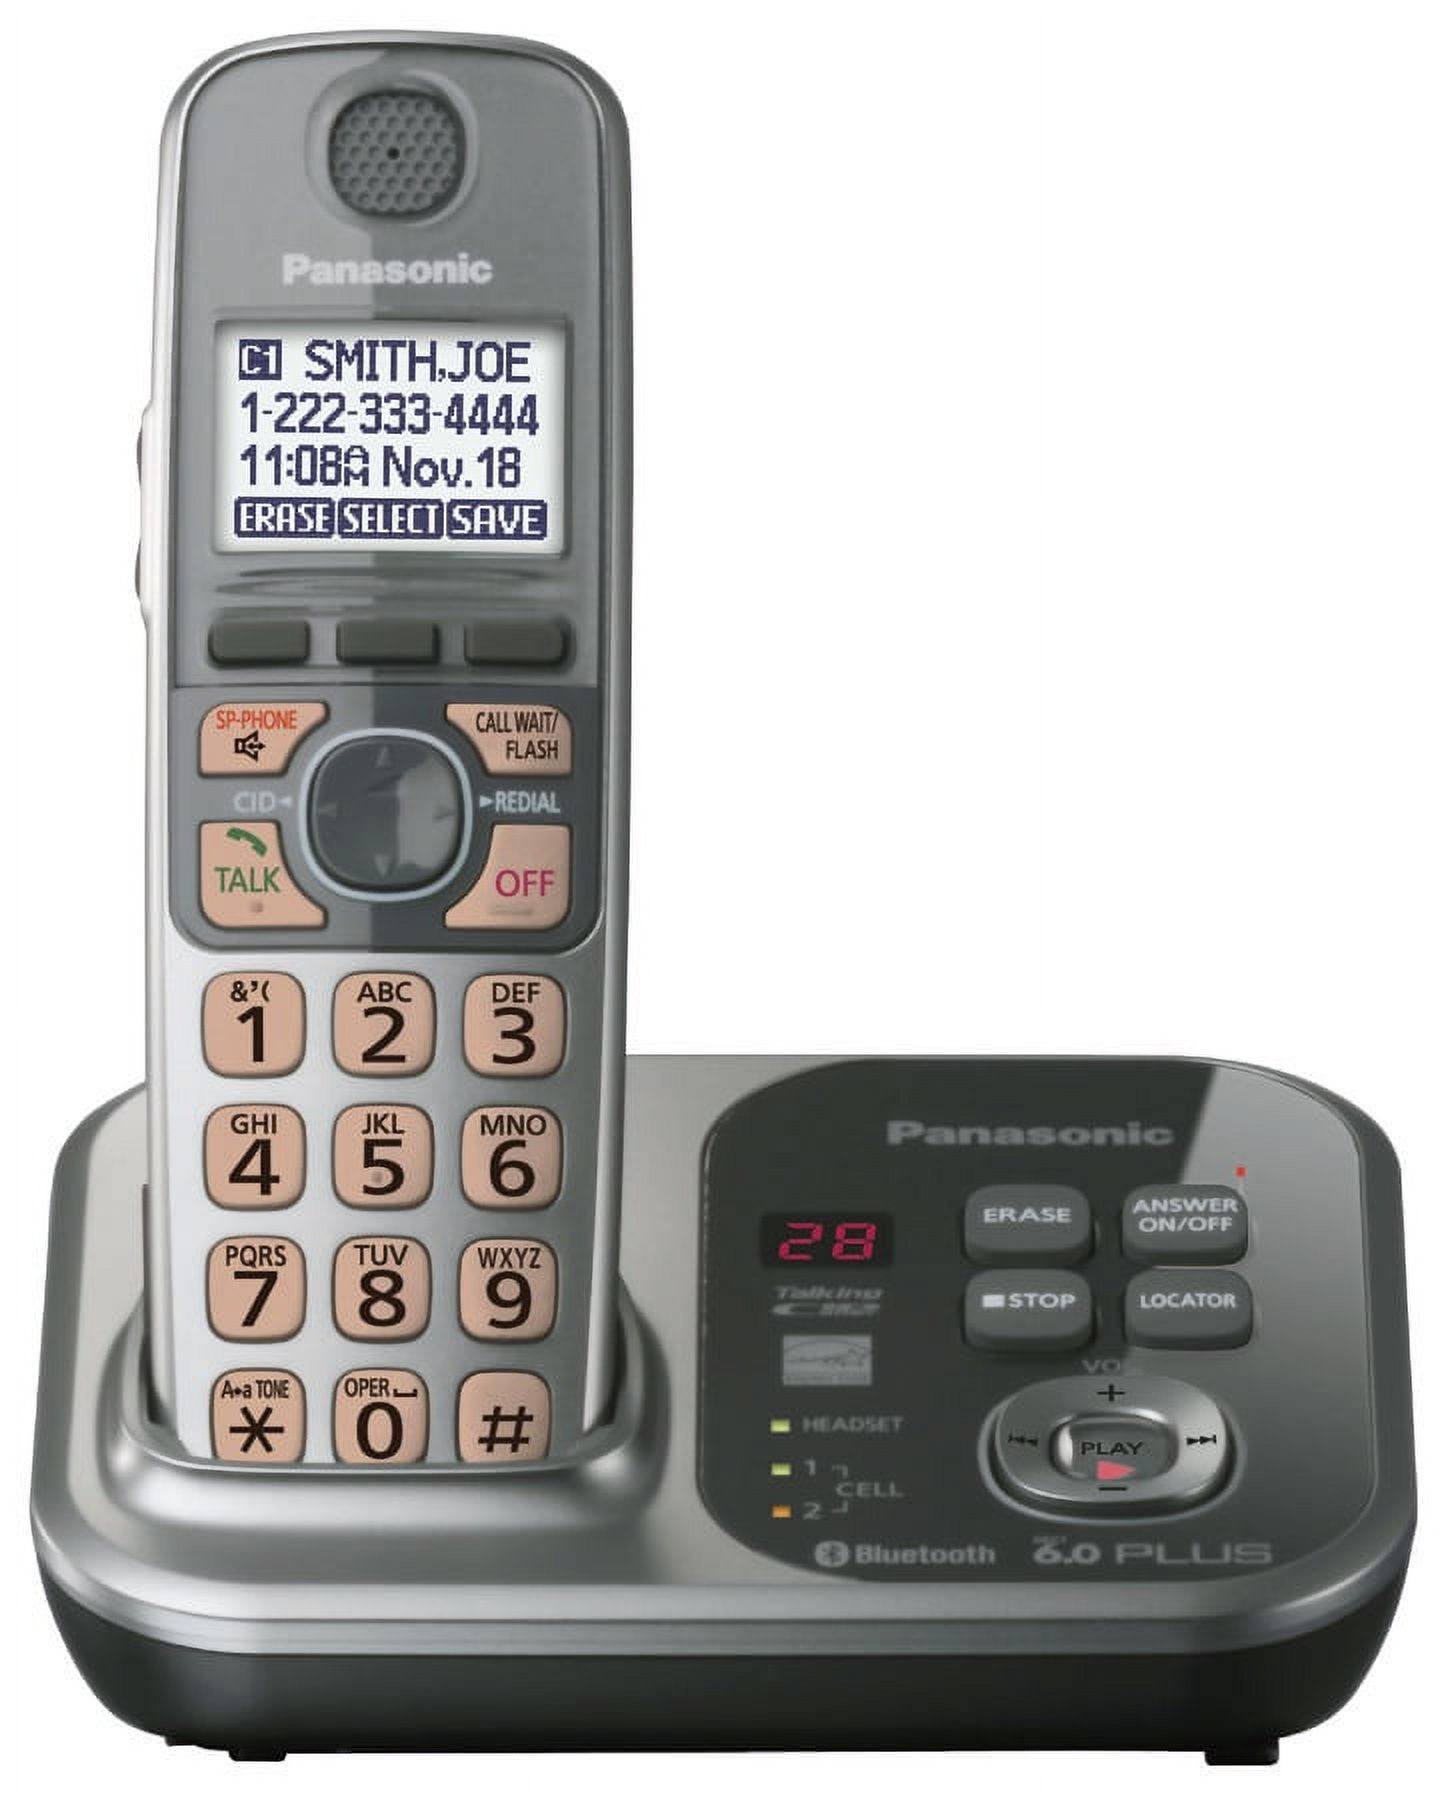 Panasonic KX-TG7731S - Cordless phone - answering system - with Bluetooth interface with caller ID/call waiting - DECT 6.0 Plus - 3-way call capability - silver - image 2 of 2